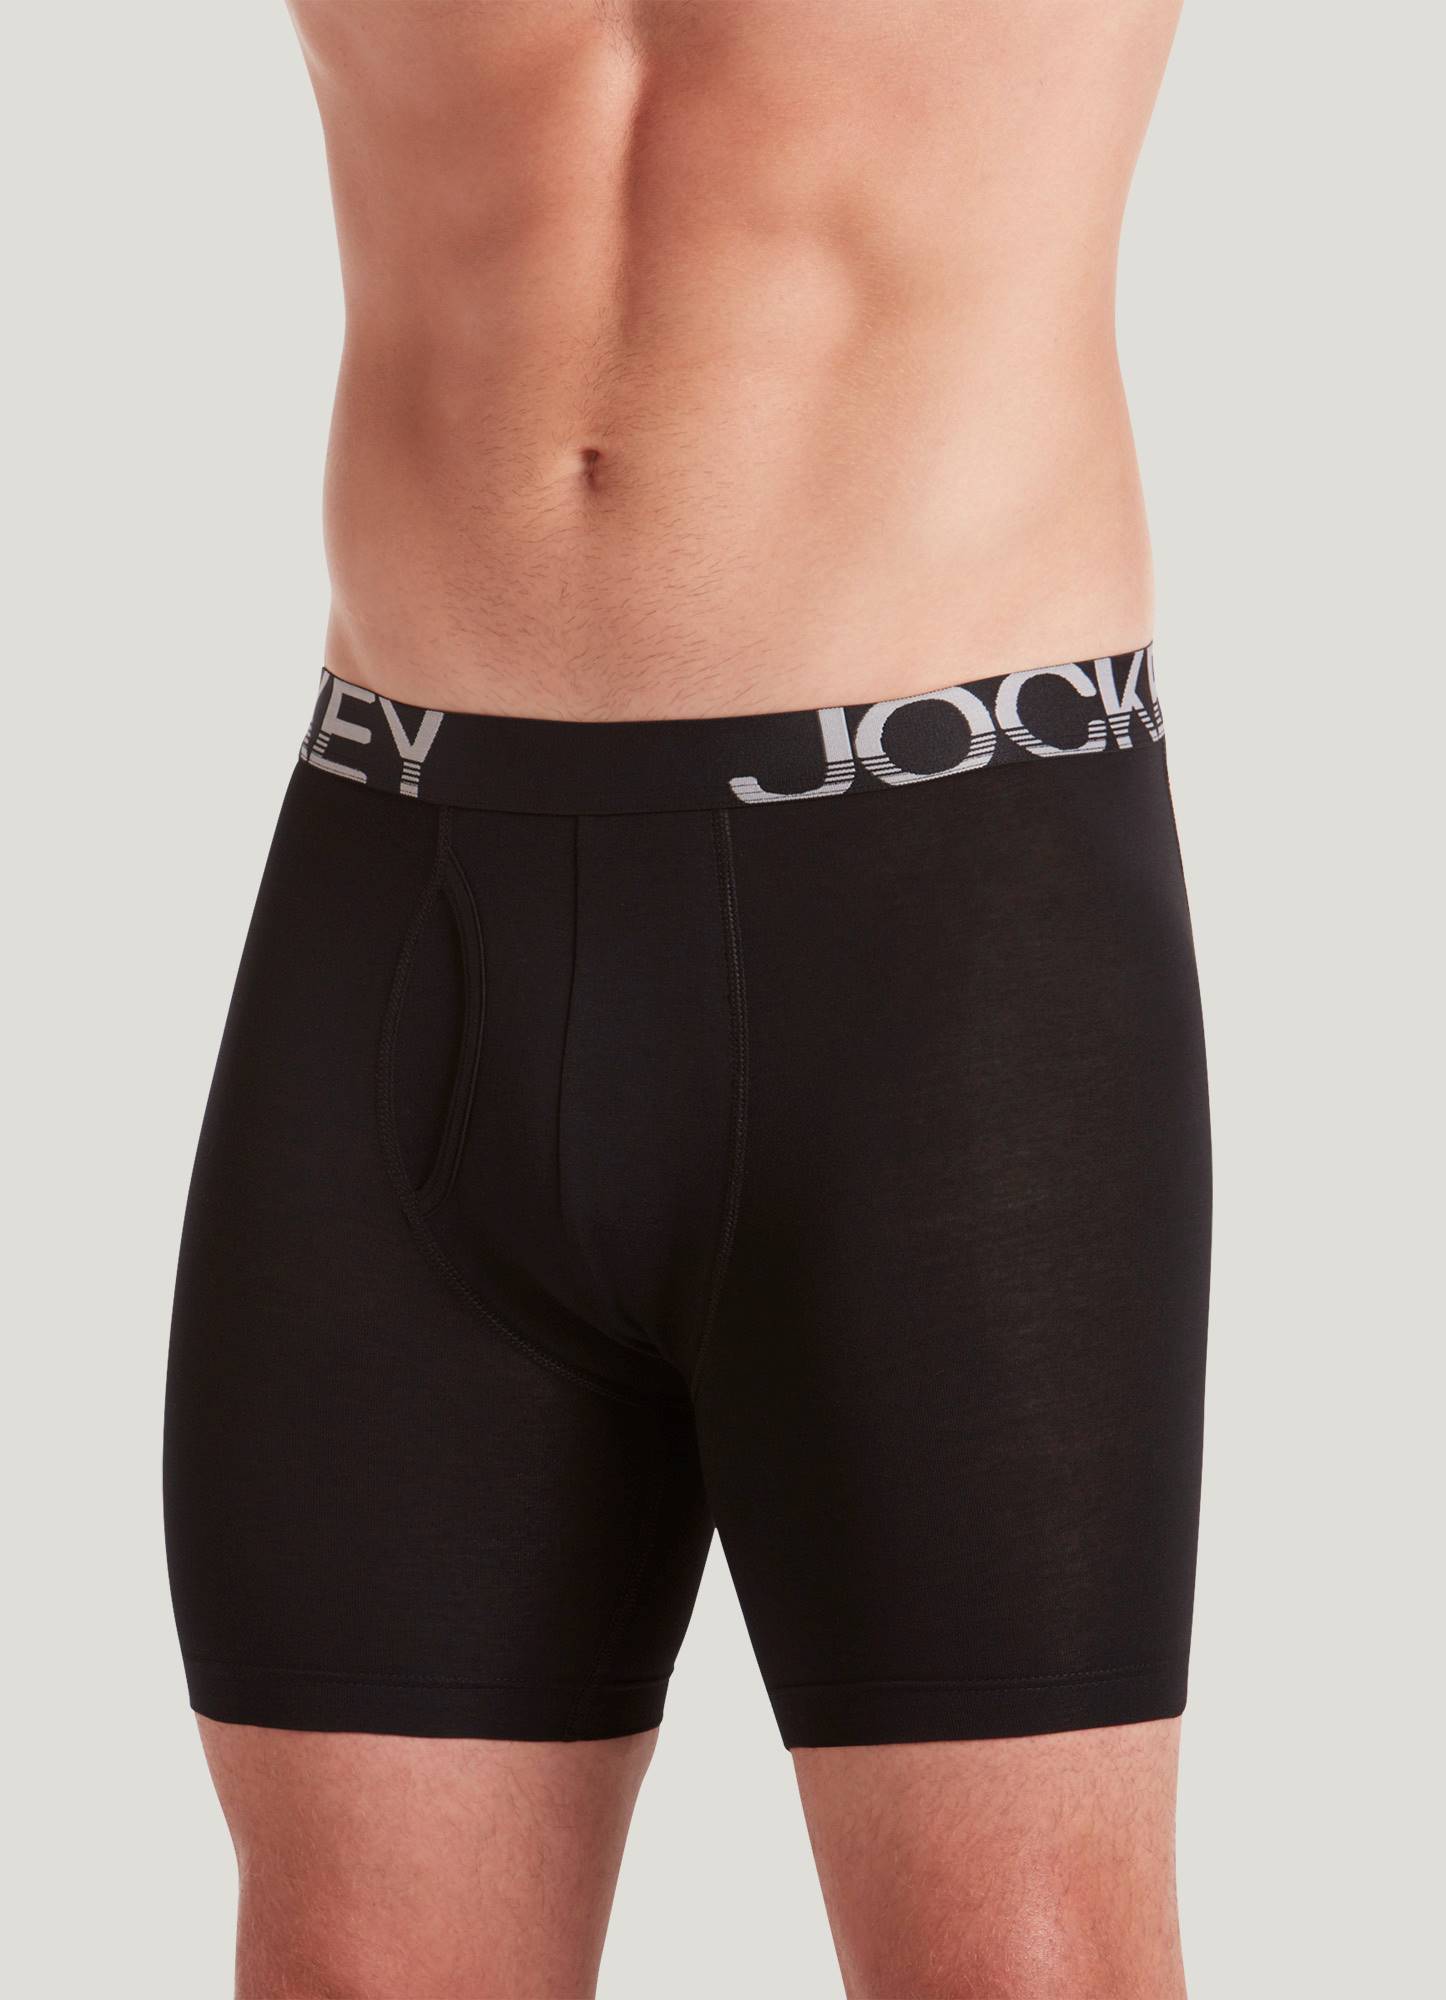 Jockey® ActiveStretch™ Midway® Brief - 3 Pack